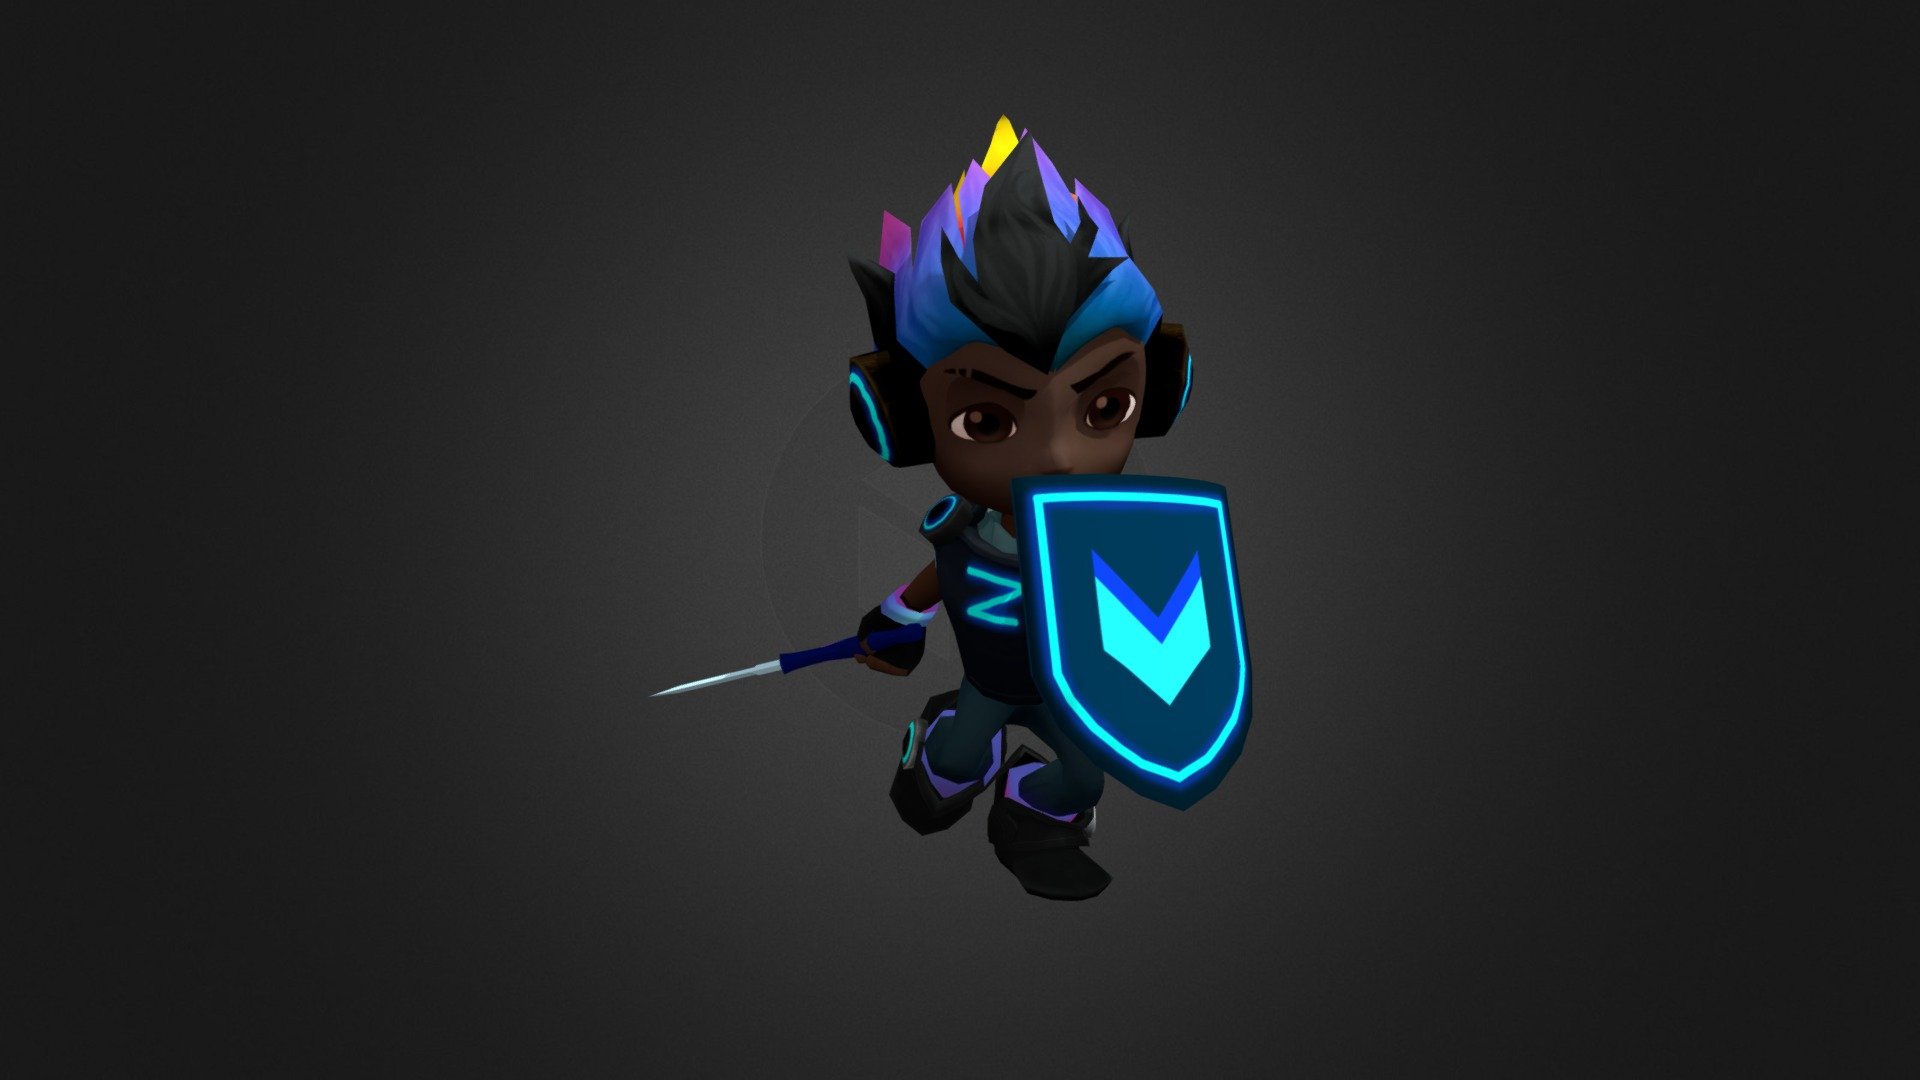 Model




3 textures

3792 poligons

Animations




Ability

Attack_1

Attack_2

Death

Idle

Idle_attack

Revive

Run

Stunned

Win

Jump
 - Hero Boy animated character - Buy Royalty Free 3D model by TheGameAssets 3d model